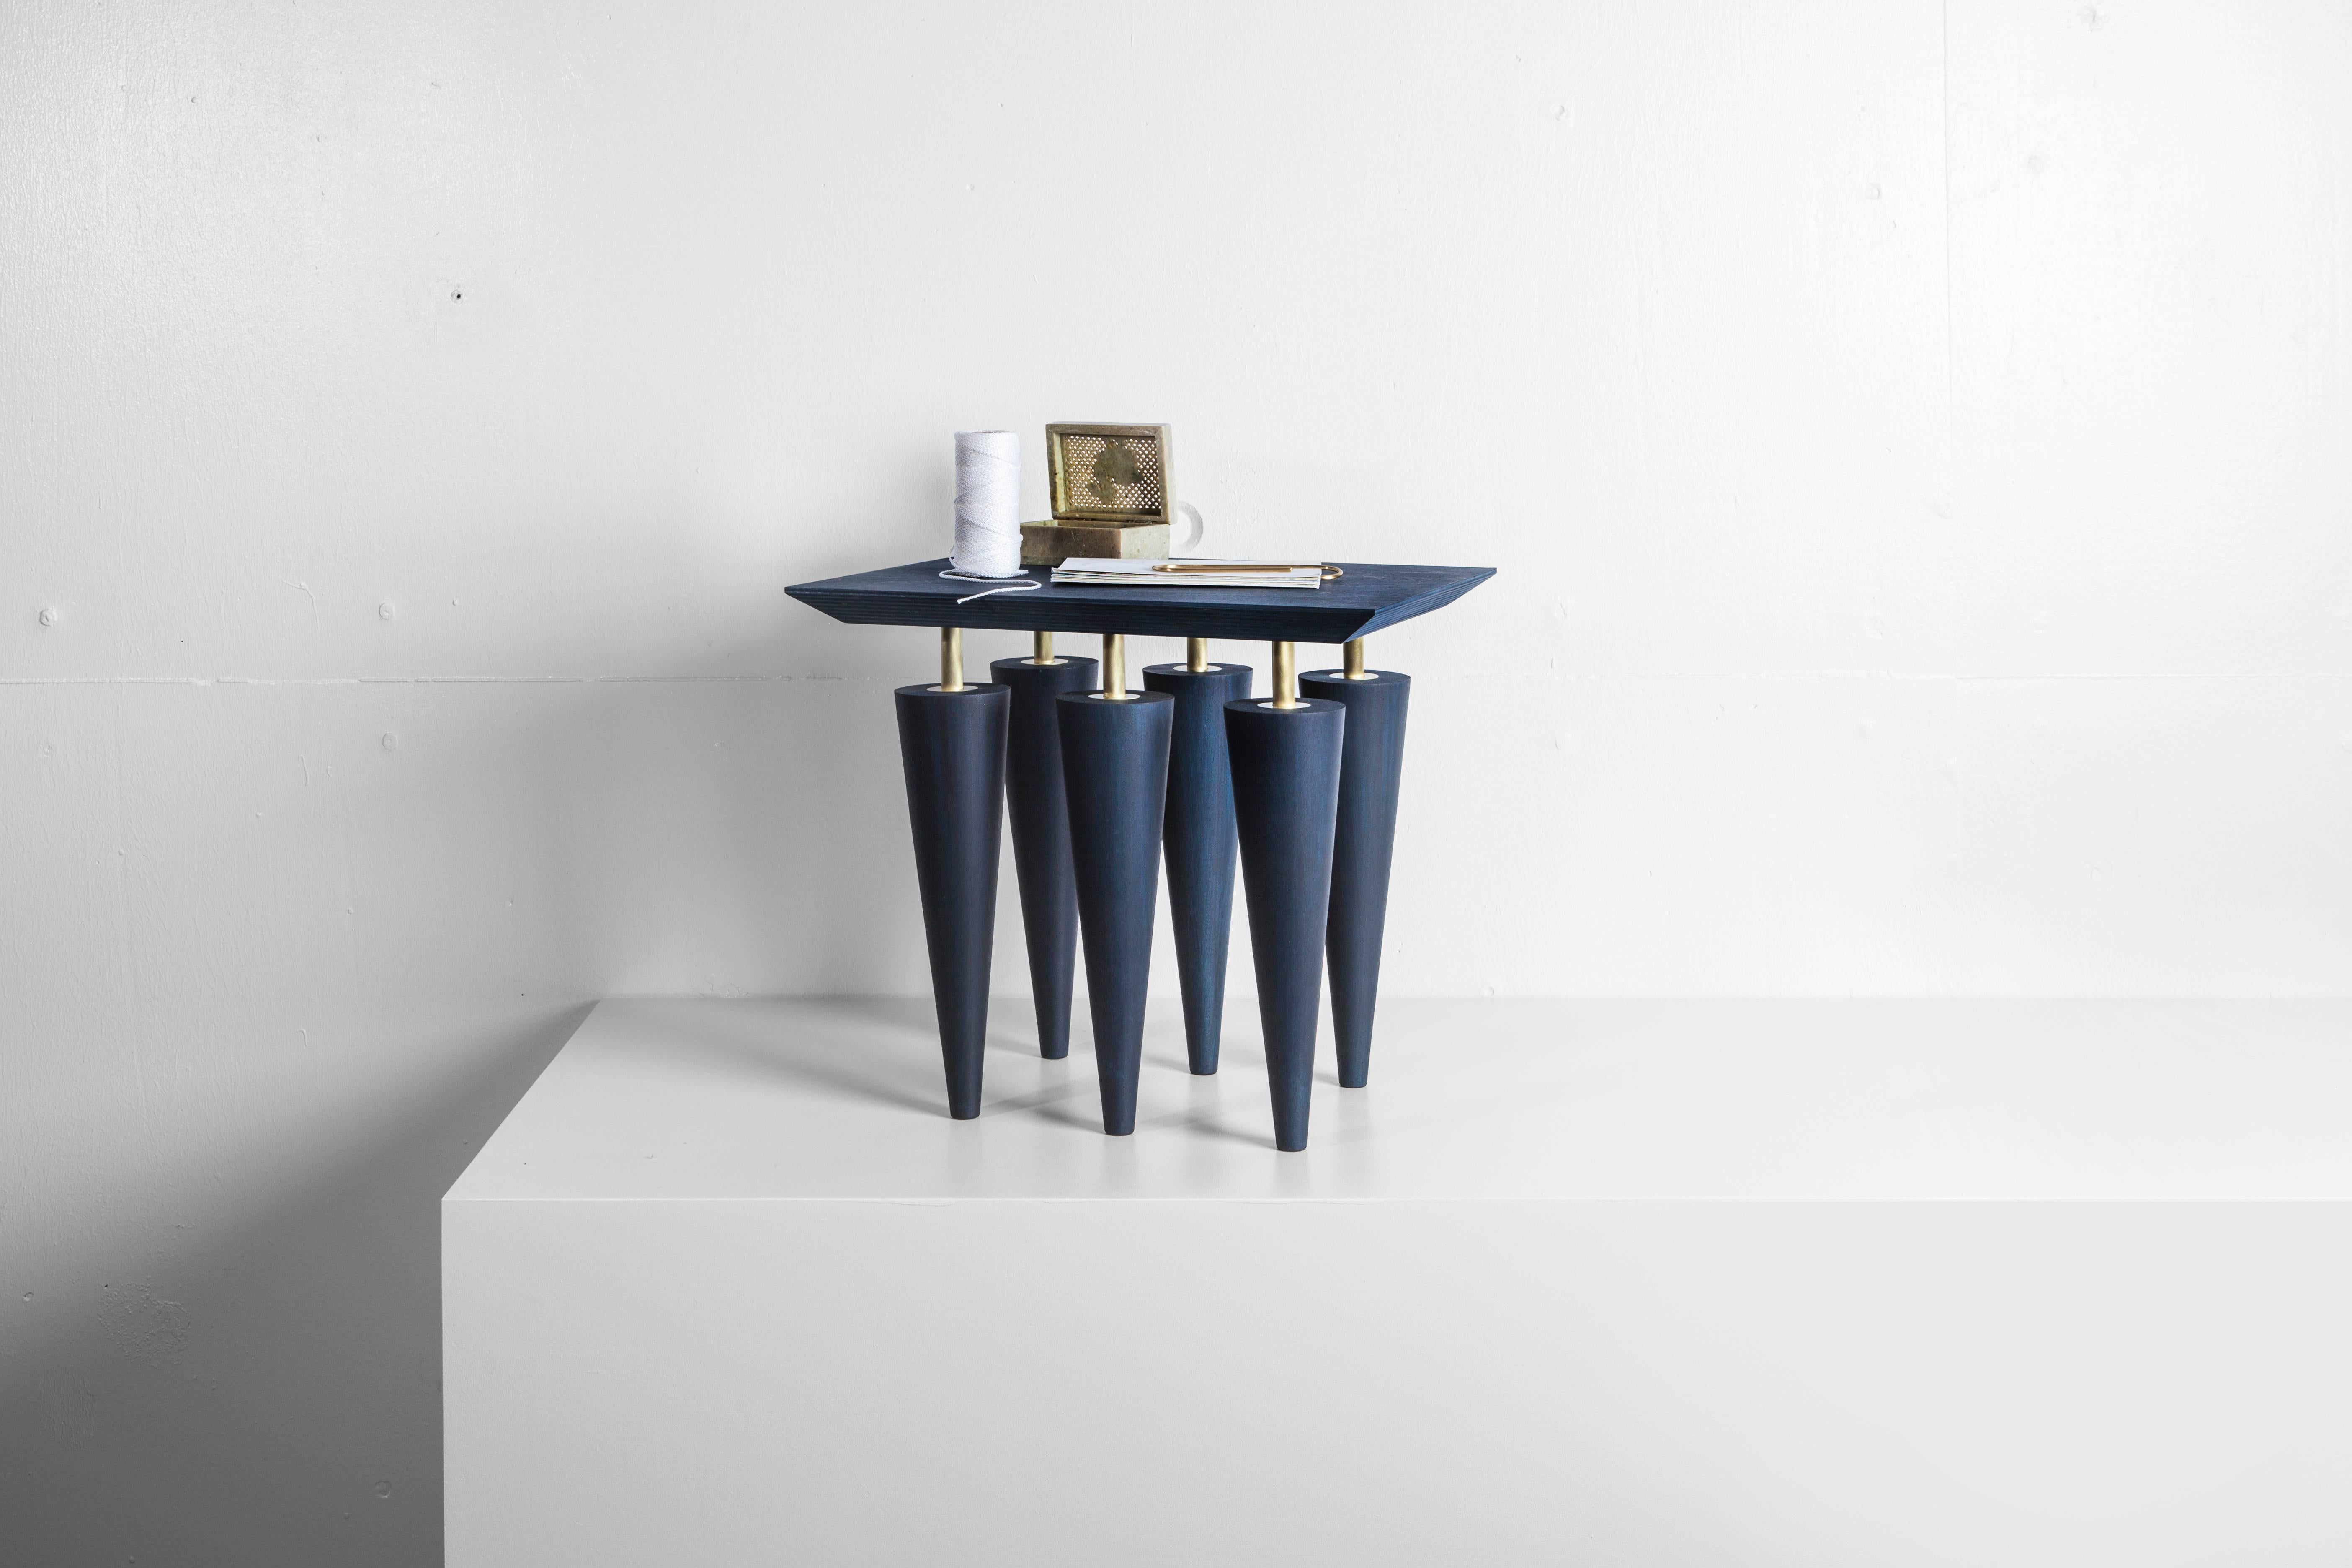 Blue birchwood and brass coffee table, Zwei design
Top: Multiplex birch plywood with birchwood veneer
Legs: Solid birchwood
Detailing: Hand brushed brass
Dimensions: 366 mm x 410 mm x 330 mm

Talitha and Michael Bainbridge are a German and